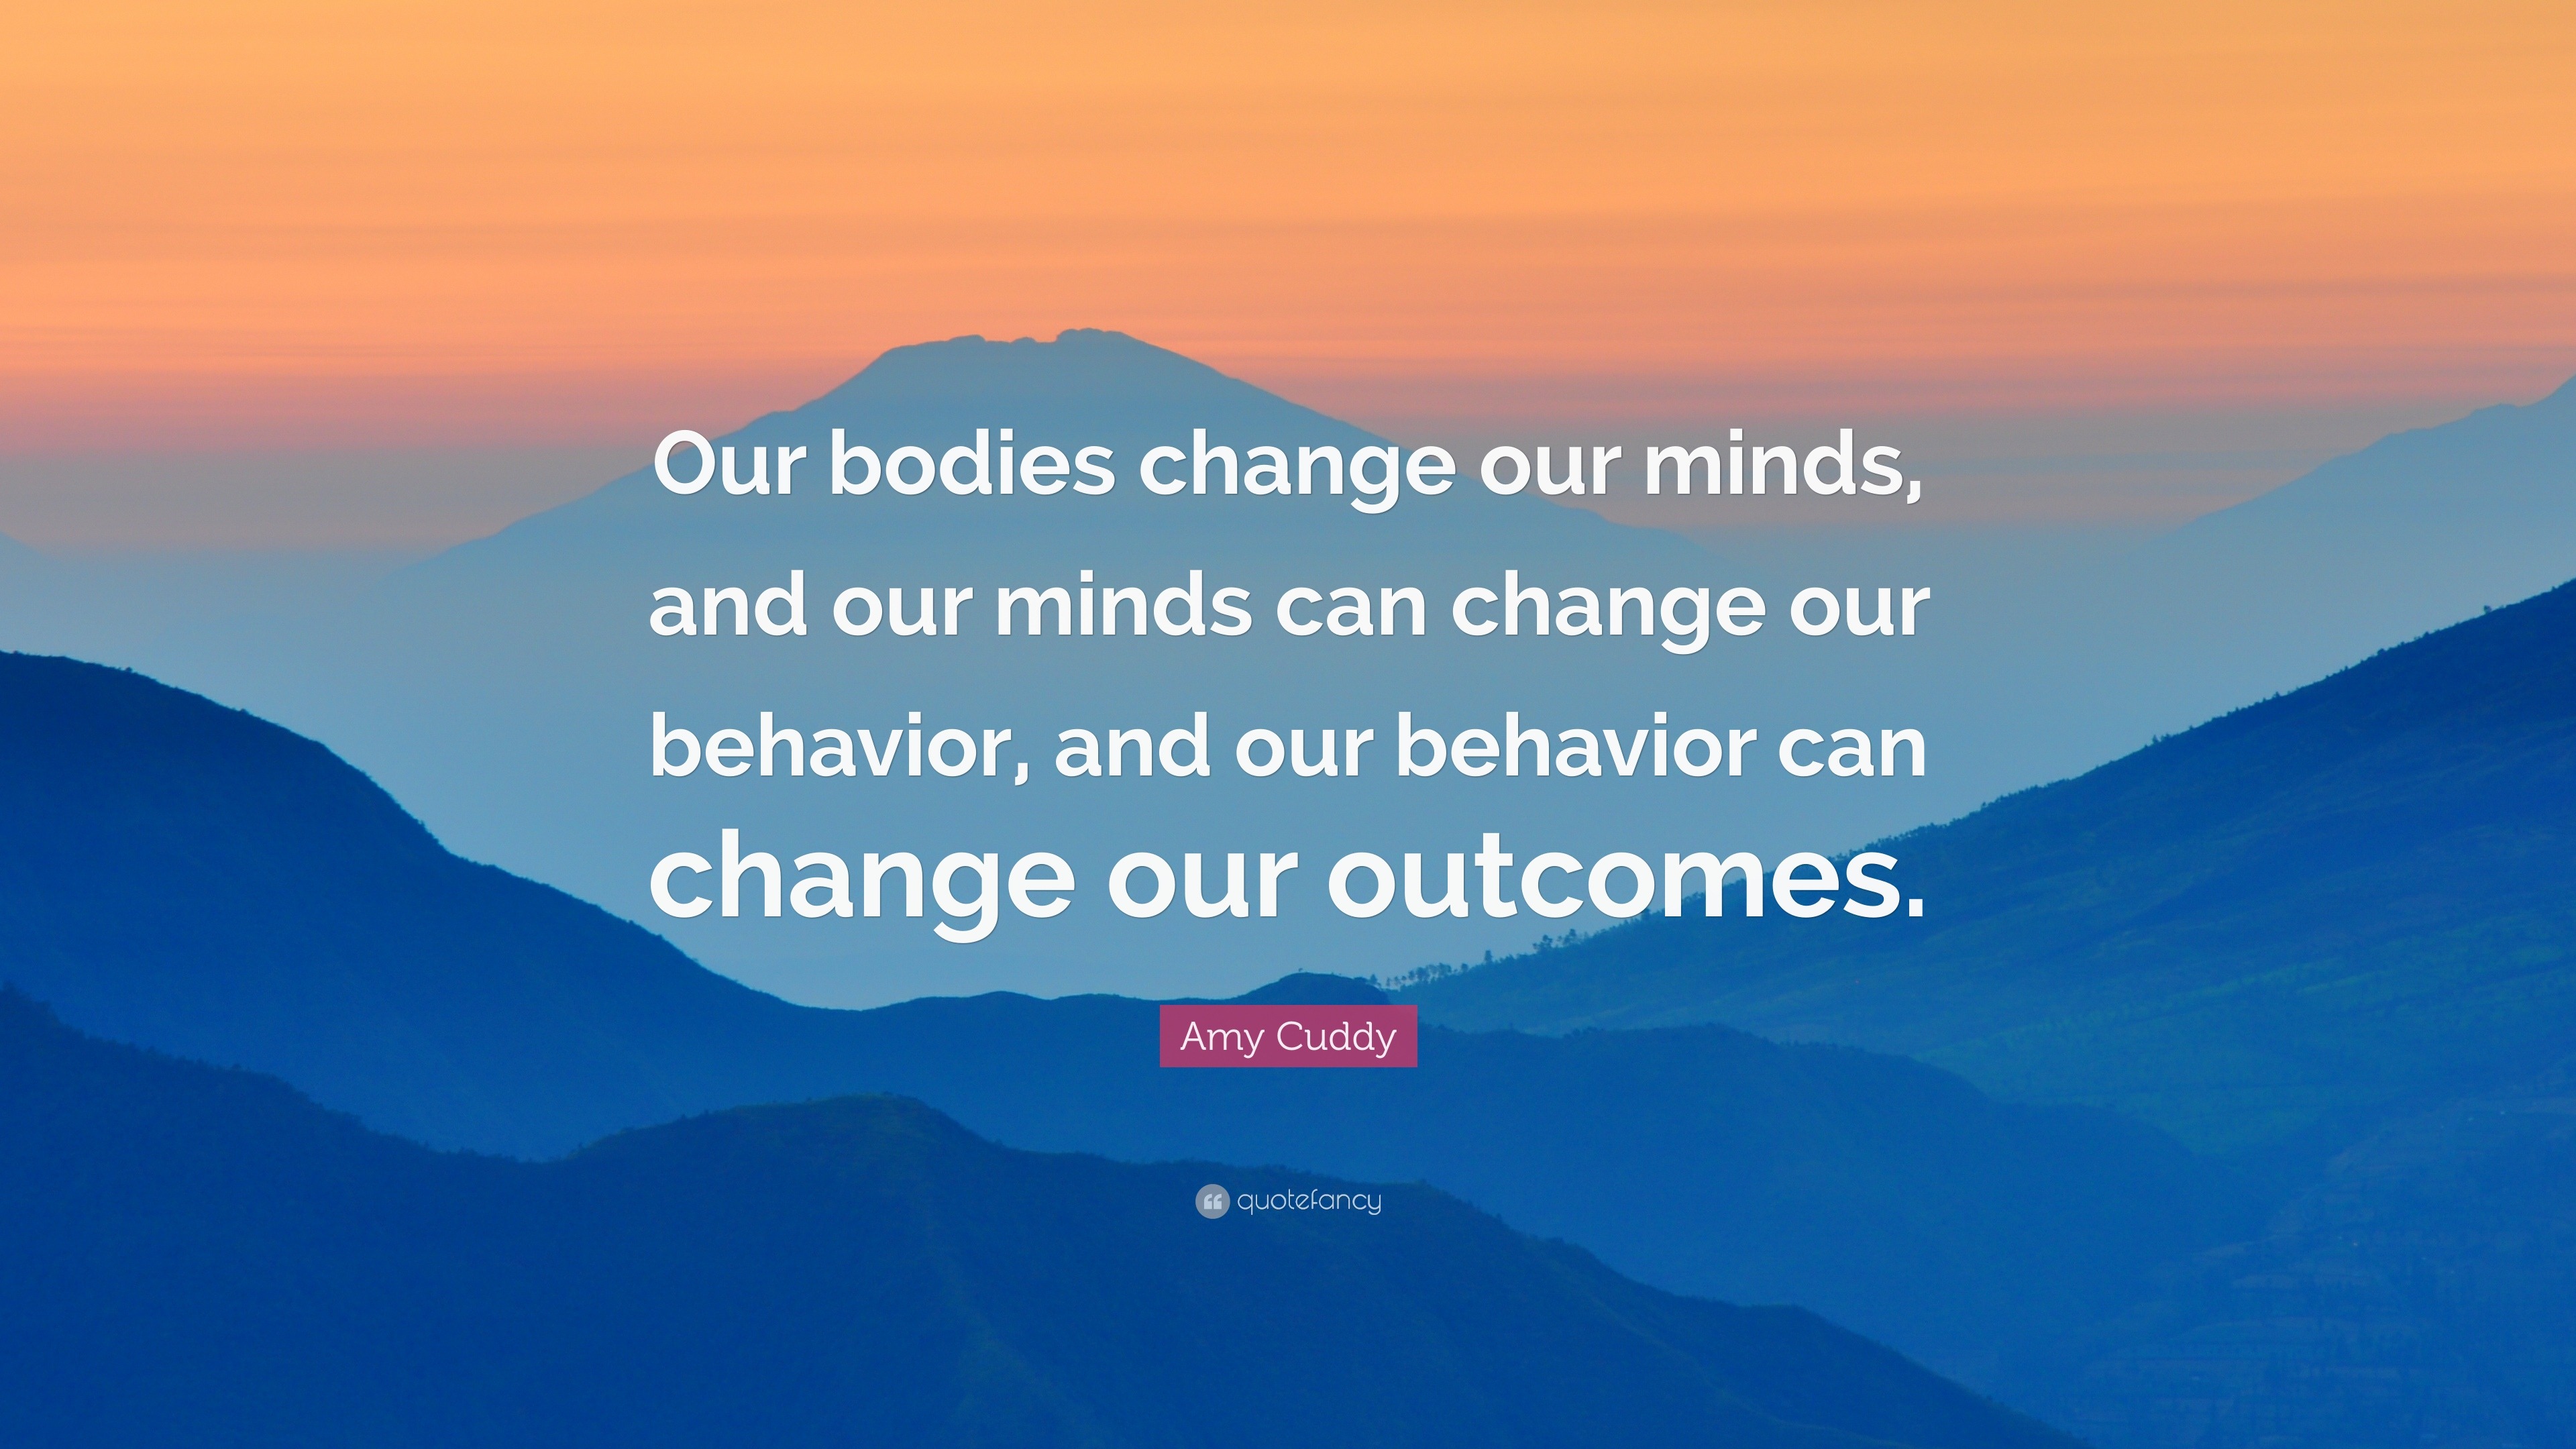 Amy Cuddy Quote: “Our bodies change our minds, and our minds can change